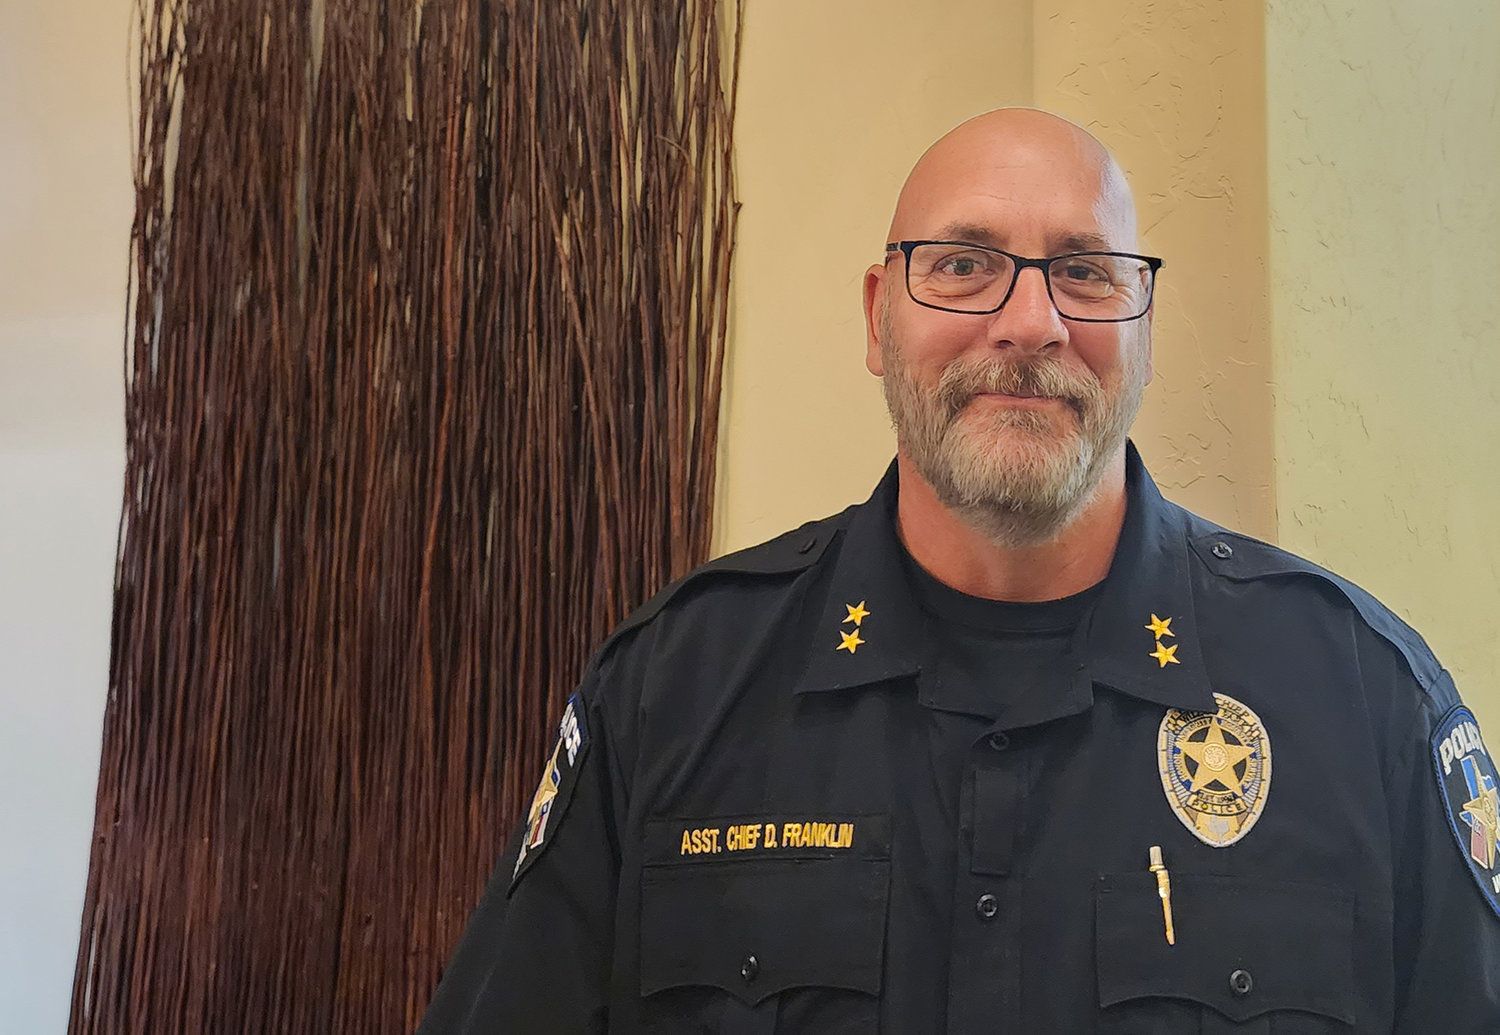 Daniel Franklin assumes the role of interim chief of the Willow Park Police Sept. effective March 24.